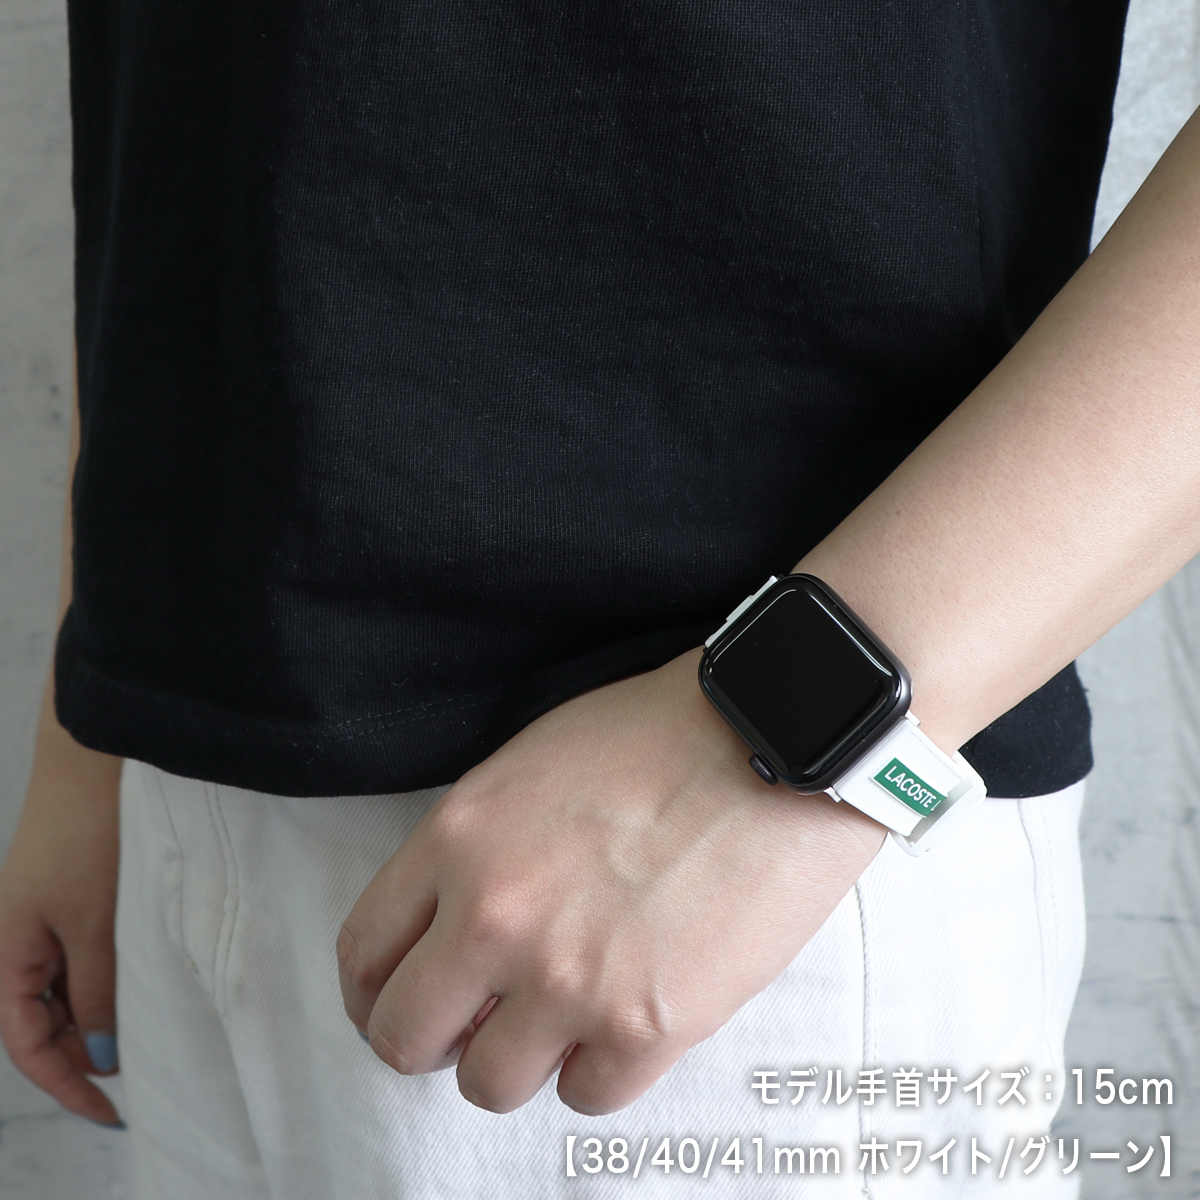 LACOSTE Lacoste Apple Watch Apple watch band belt 2050003 white green silicon Raver 38/40/41mm strap Iwatch